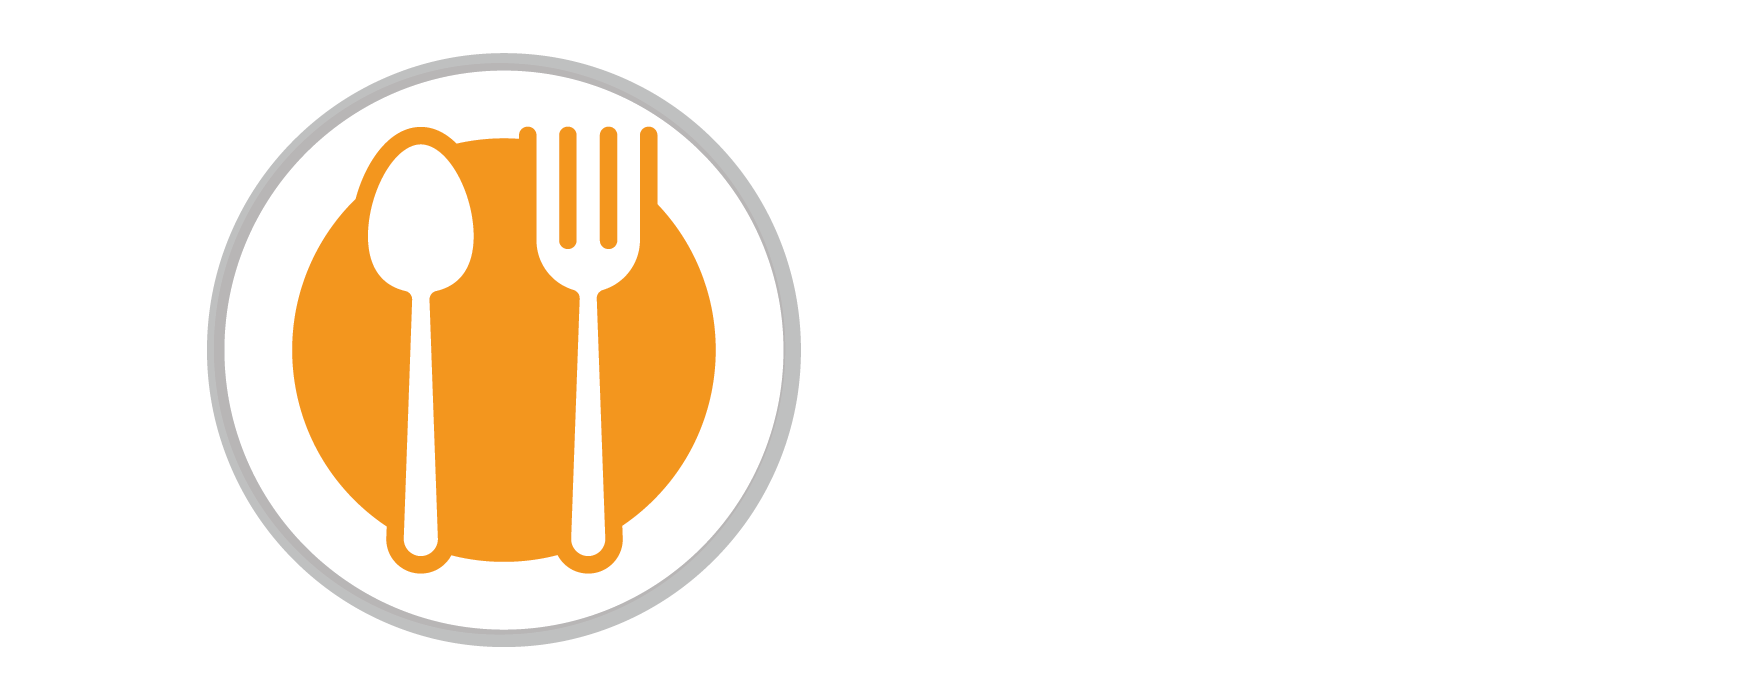 Illustration of a dinner plate with spoon and fork